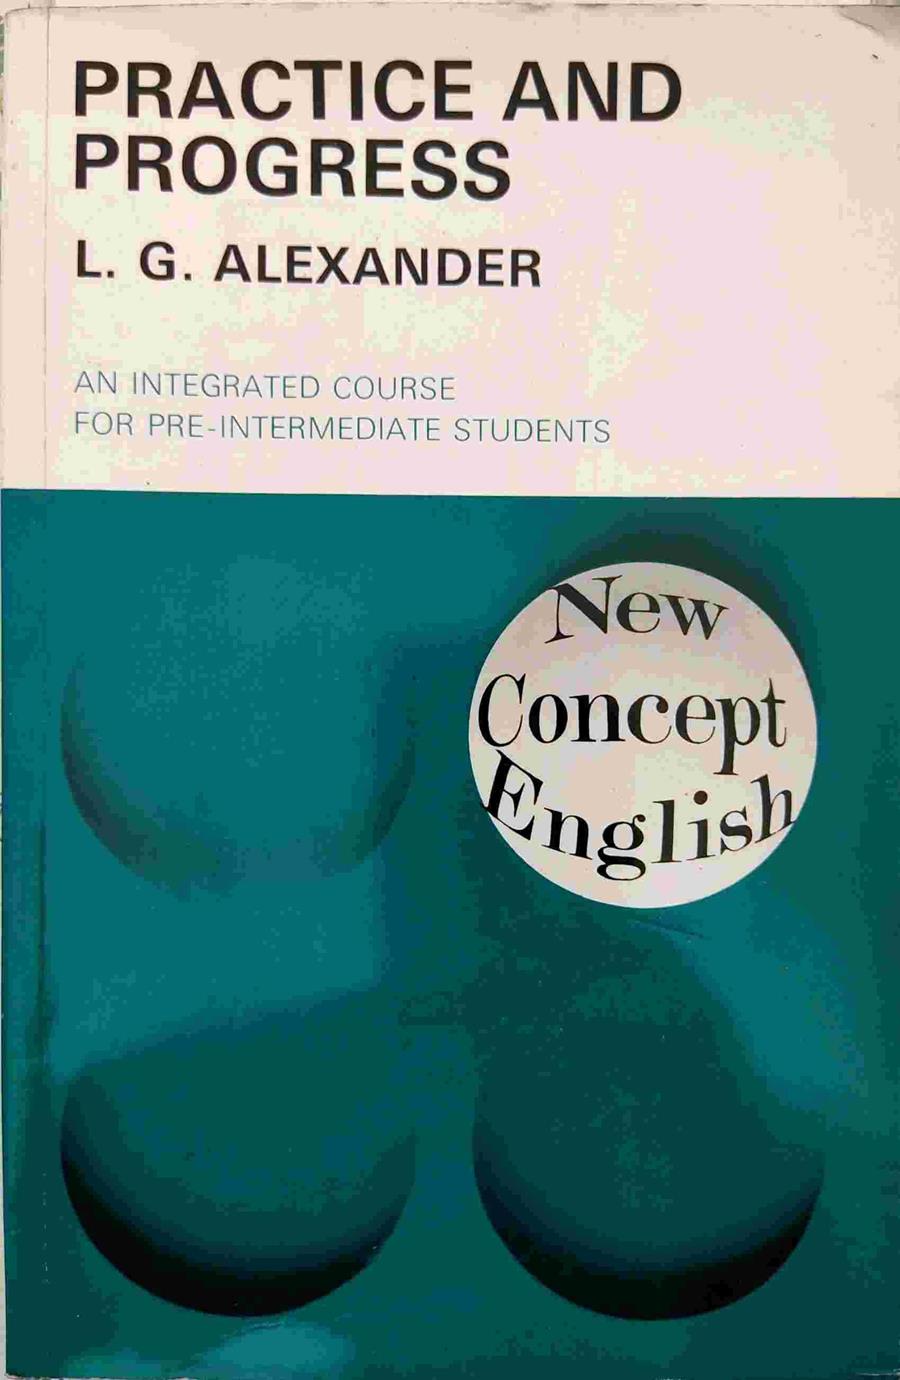 Practice and Progress An Integrated Course for Pre-Intermediate students | 138868 | Alexander, L G